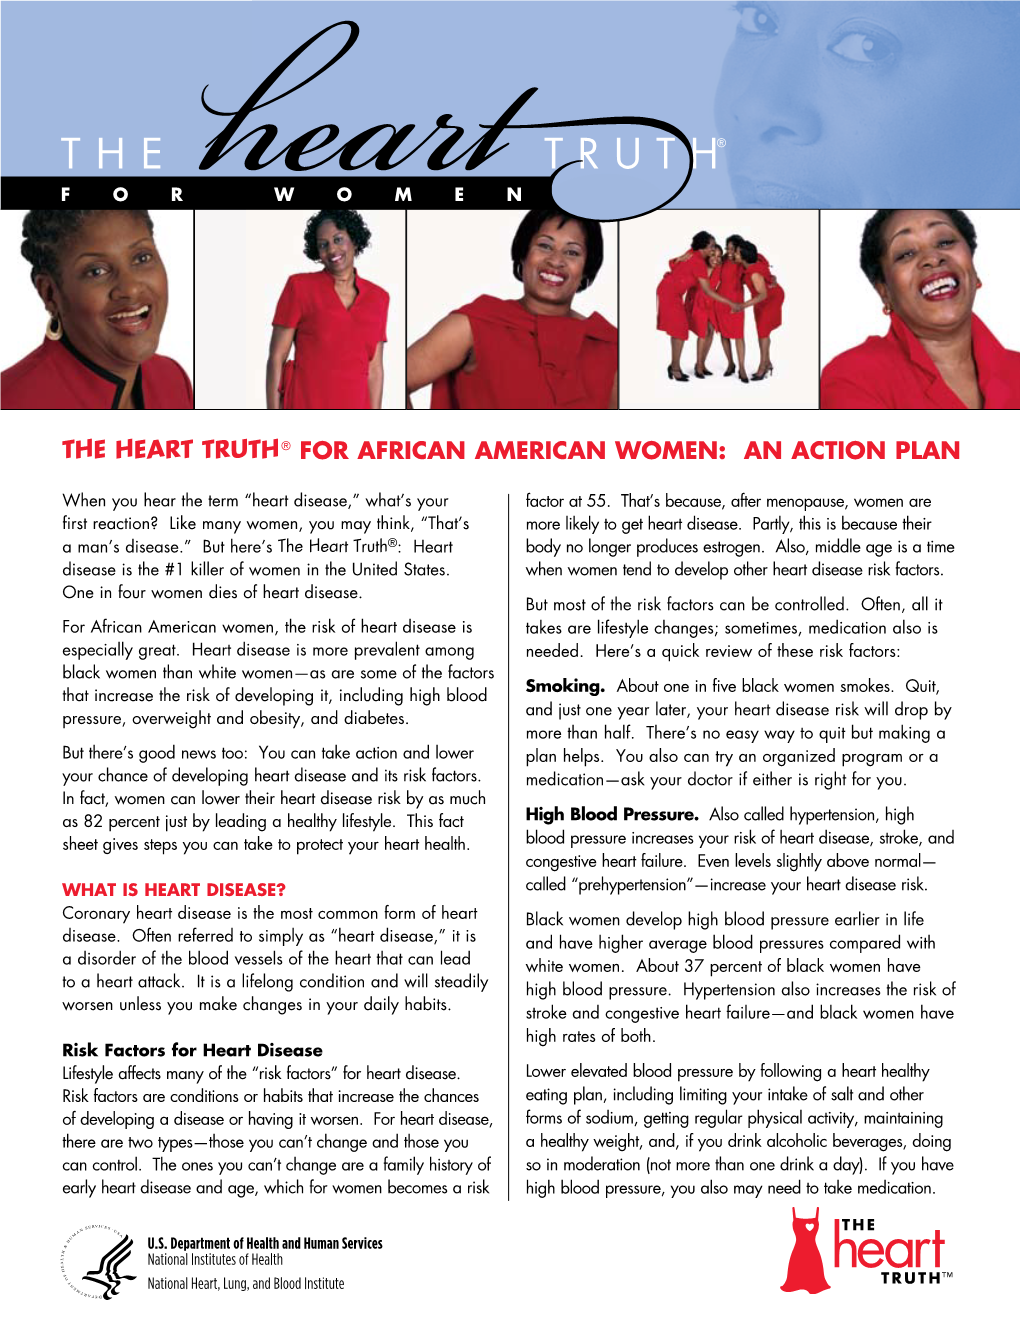 The Heart Truth® for African American Women: an Action